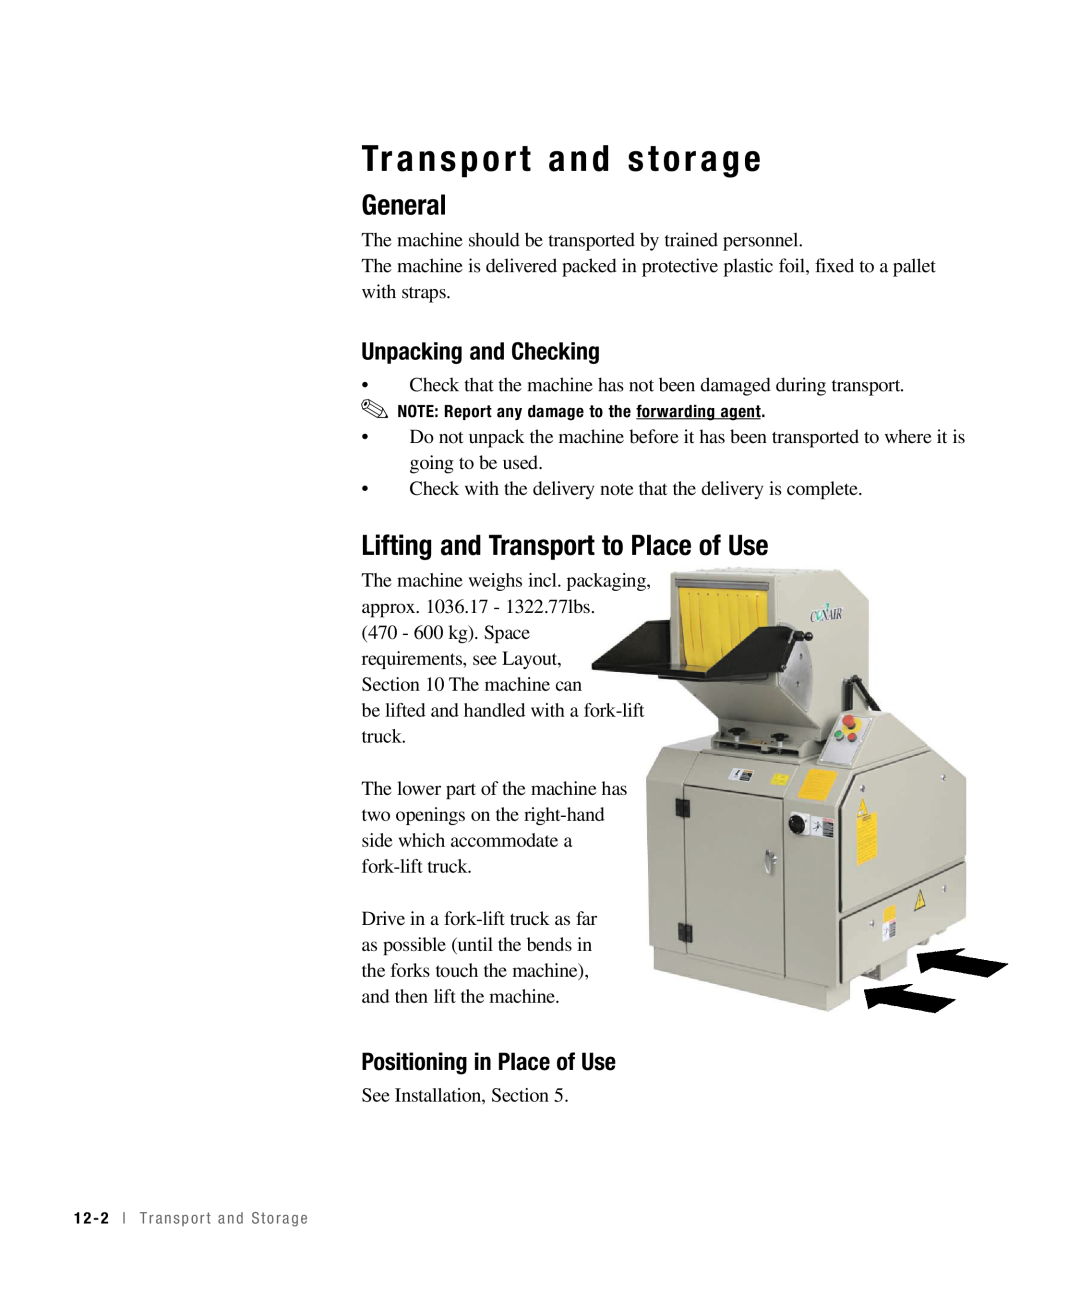 Conair CHS-810 manual Transport and storage, Lifting and Transport to Place of Use, Unpacking and Checking, General 